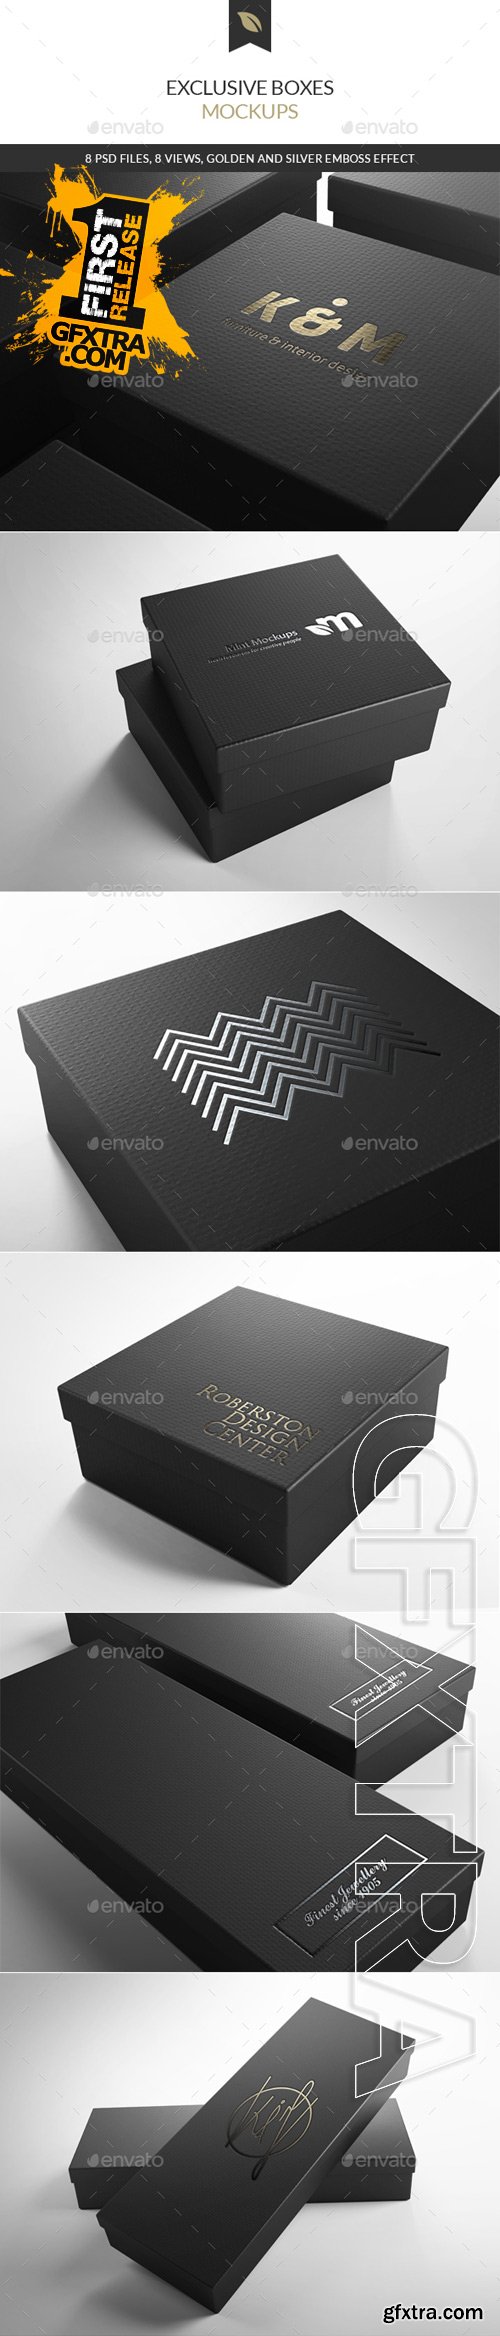 GraphicRiver - Exclusive Boxes Mockups 9716219